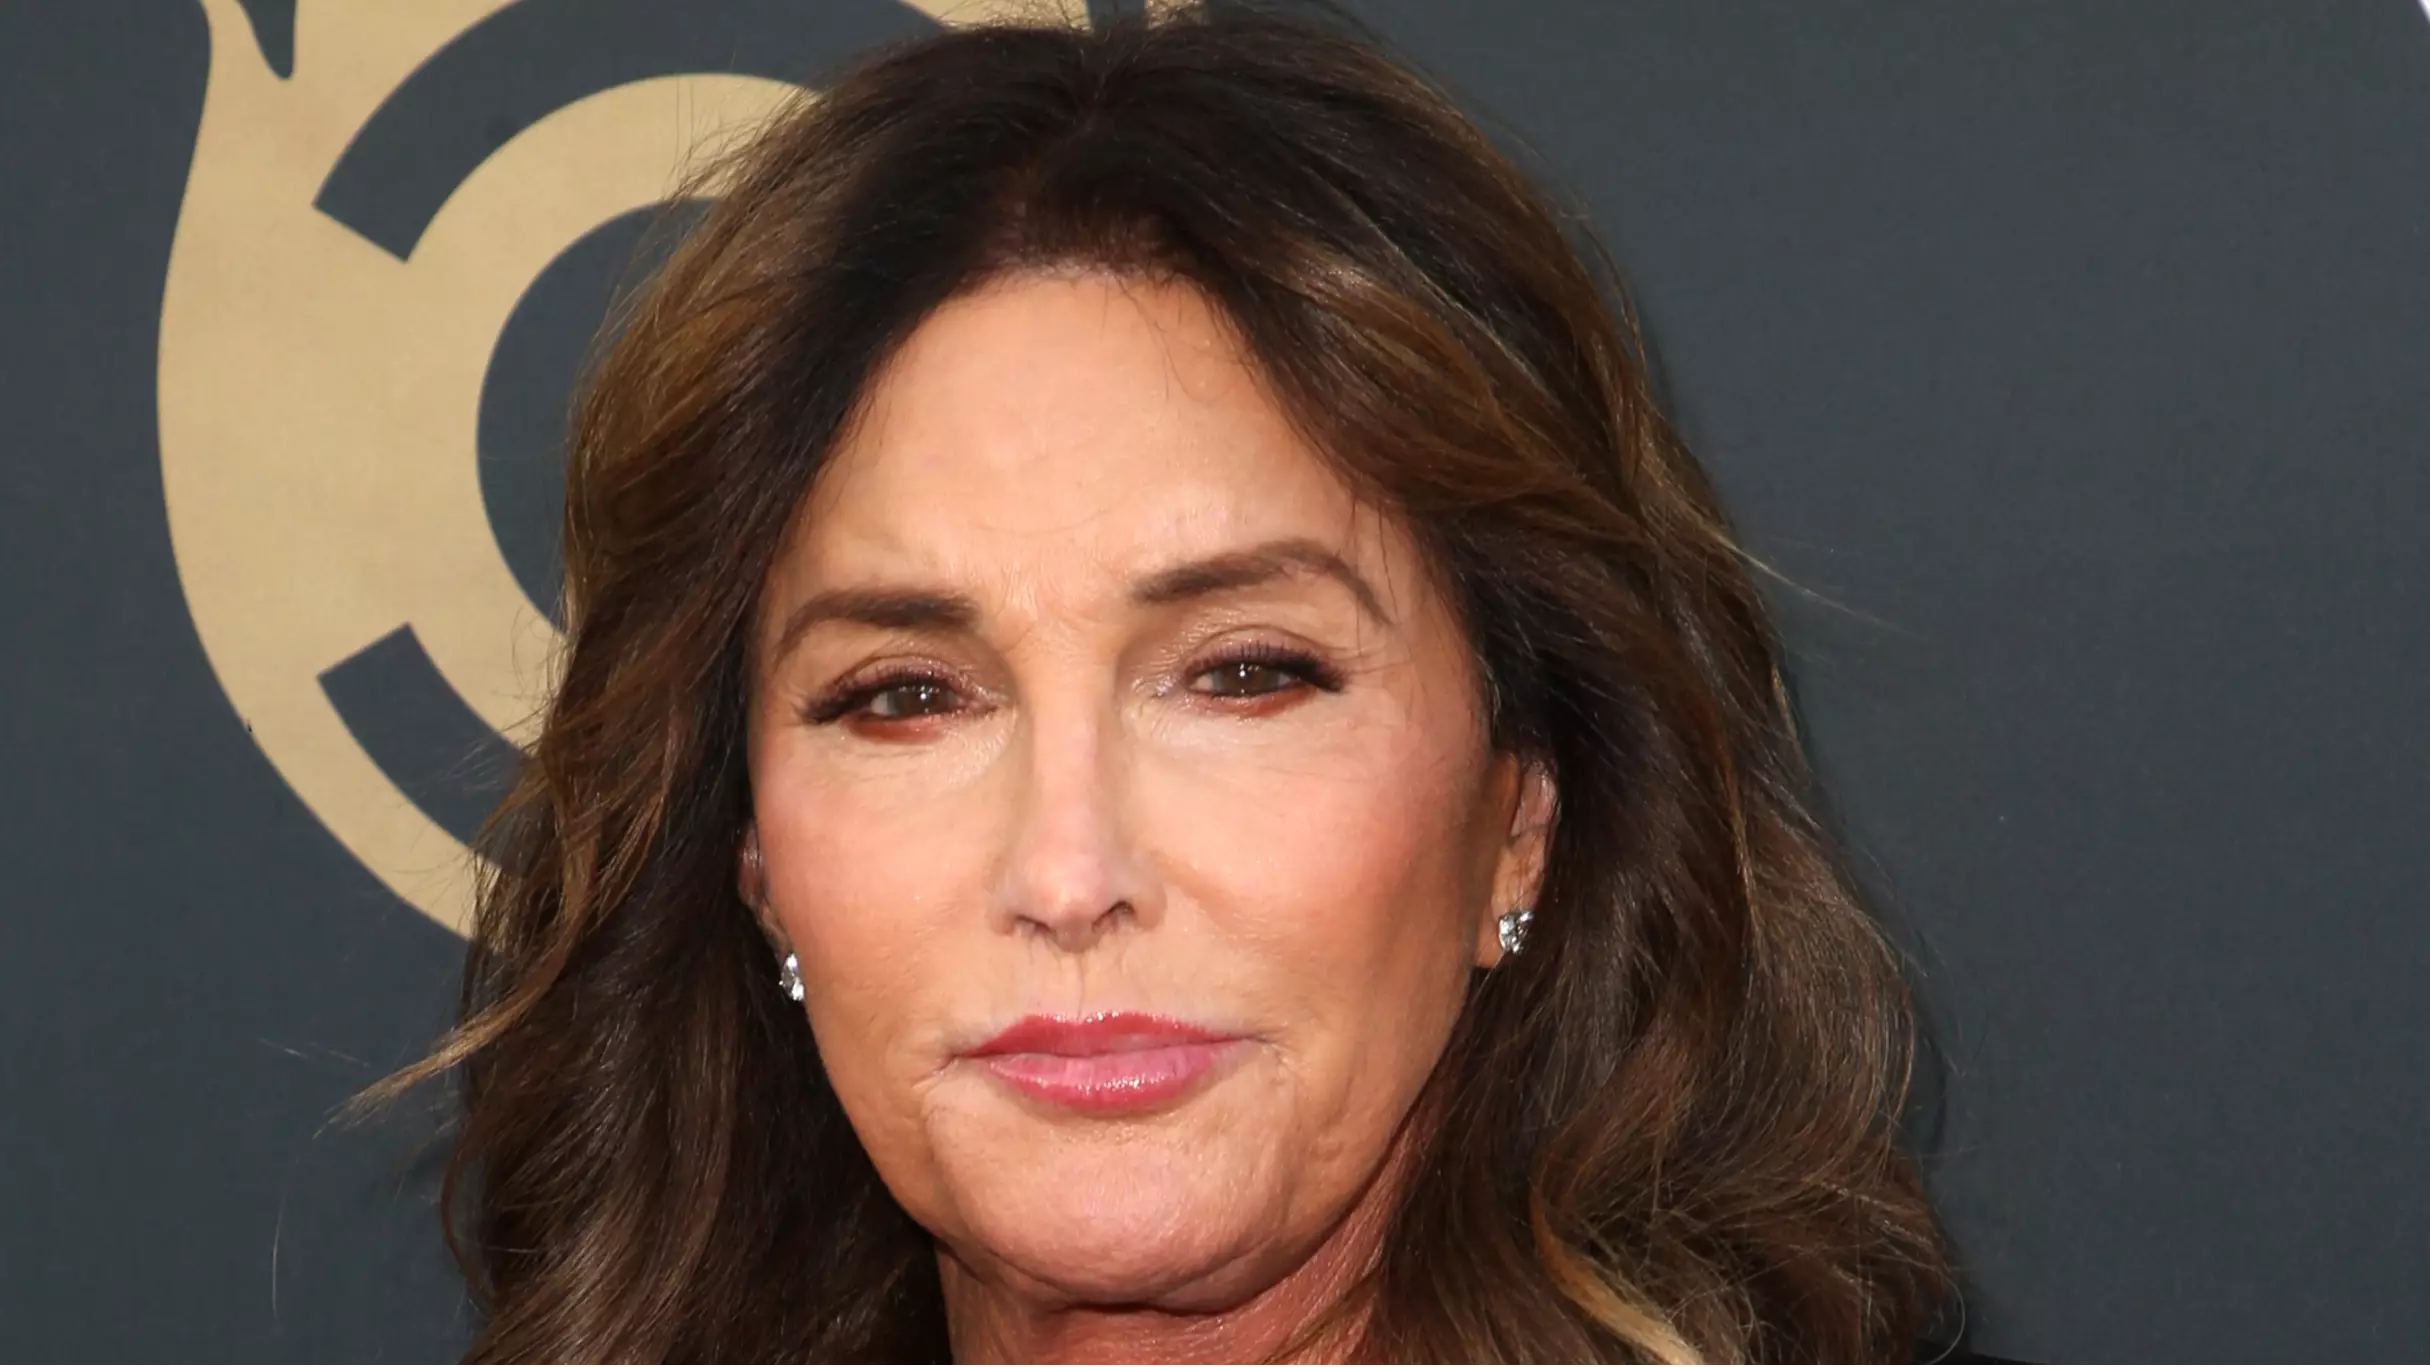 Caitlyn Jenner 'Taking Part' In This Year's I'm A Celebrity... Get Me Out Of Here! 